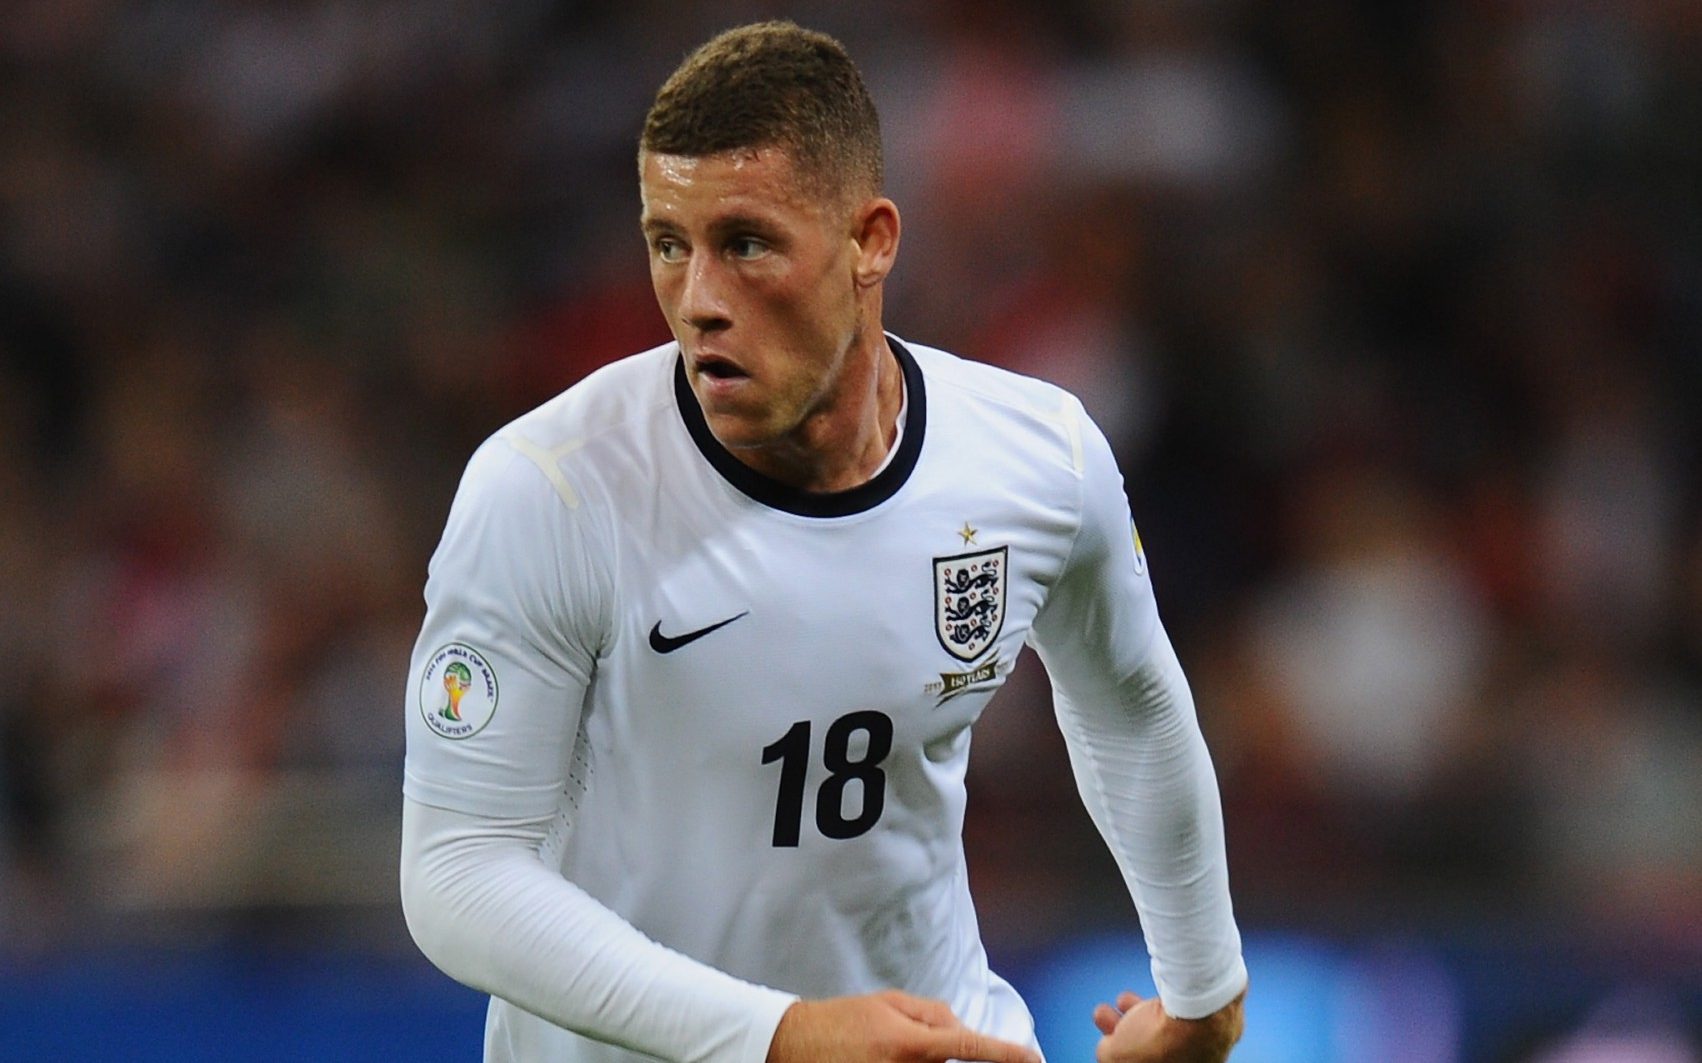 Troubled Ross Barkley at crossroads with his career spiralling towards oblivion